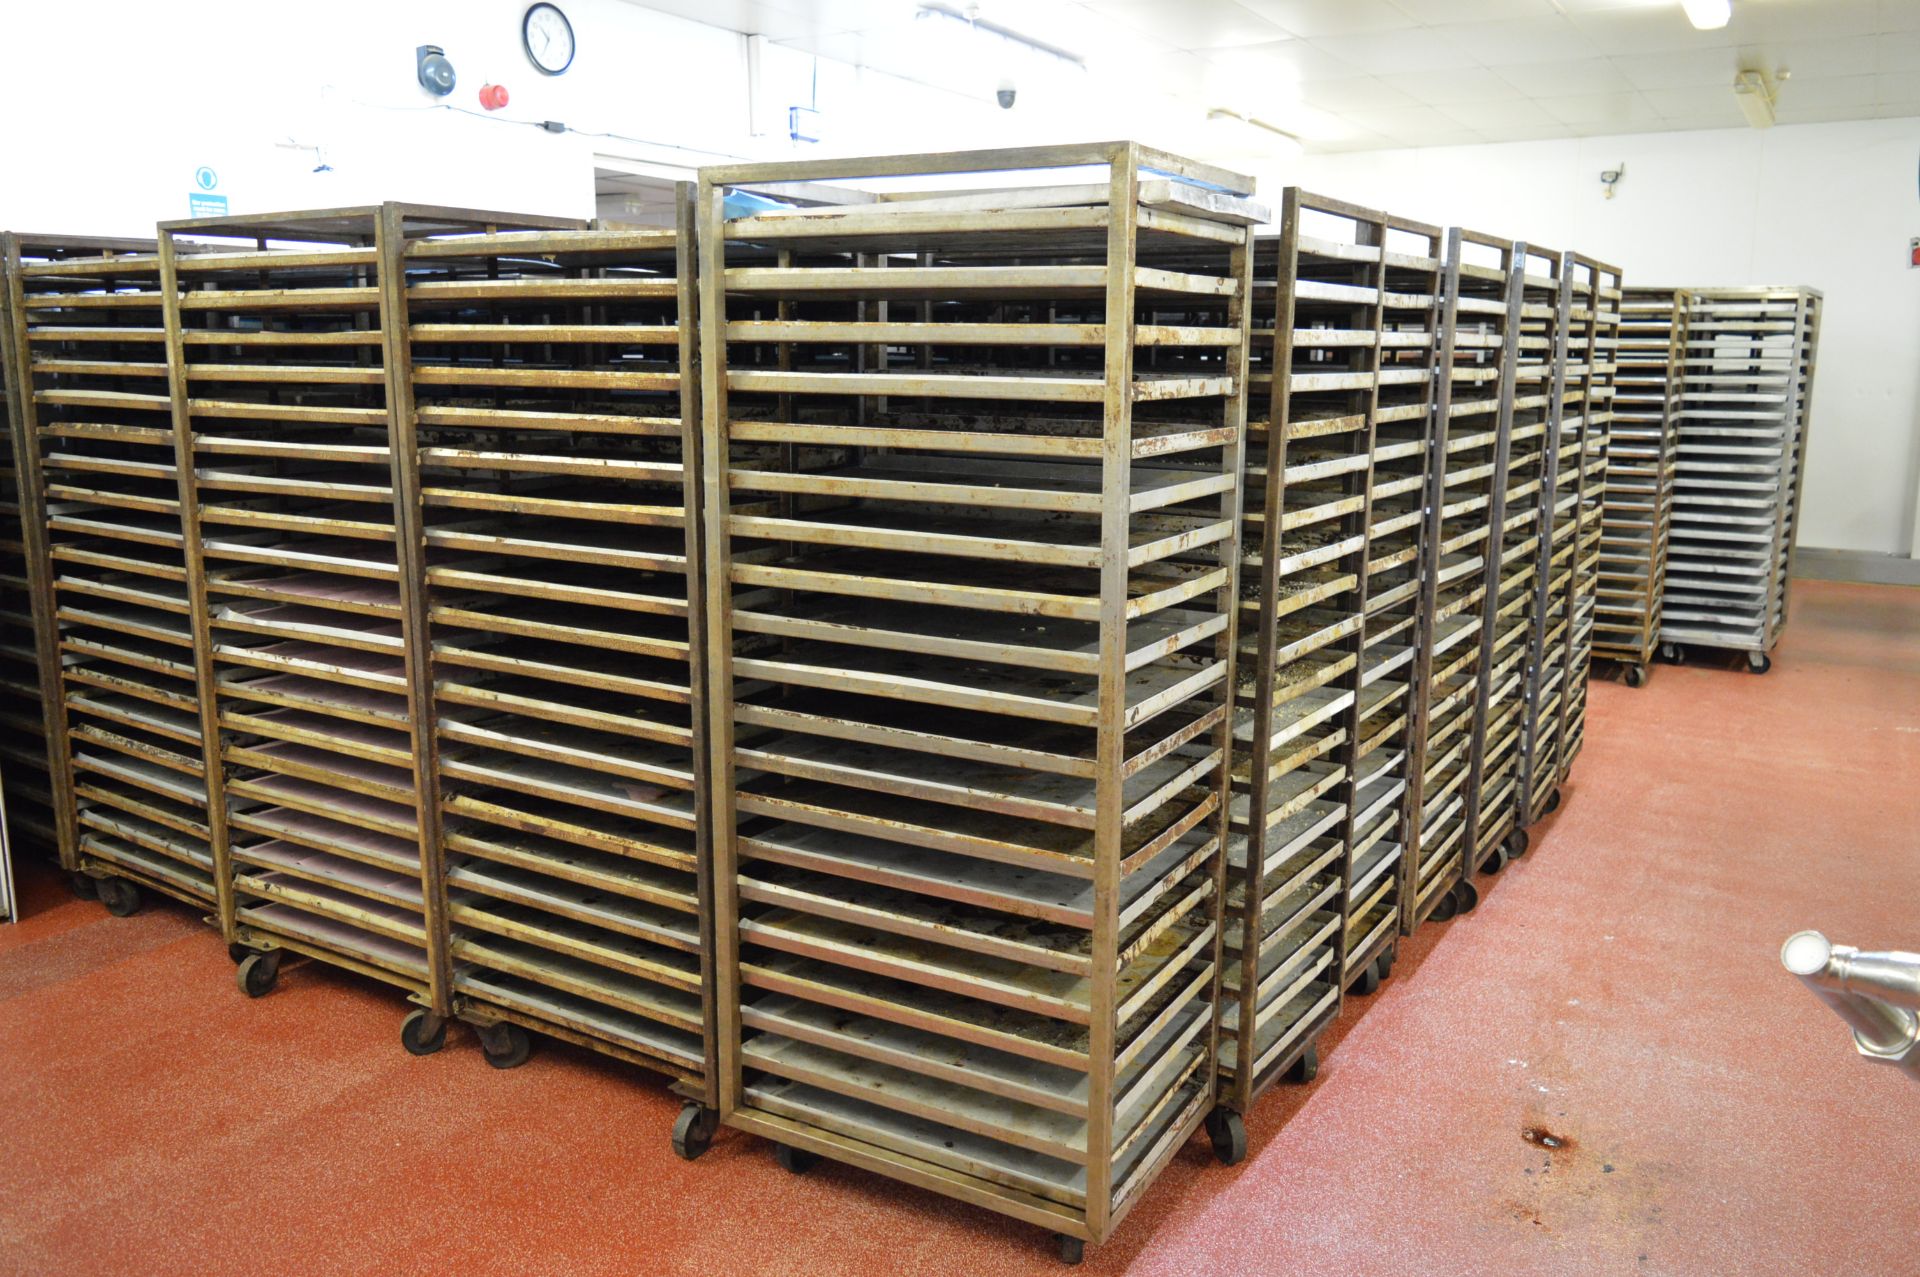 5 x stainless steel, mobile oven racks with trays (Located at Crantock Bakery, Newquay)